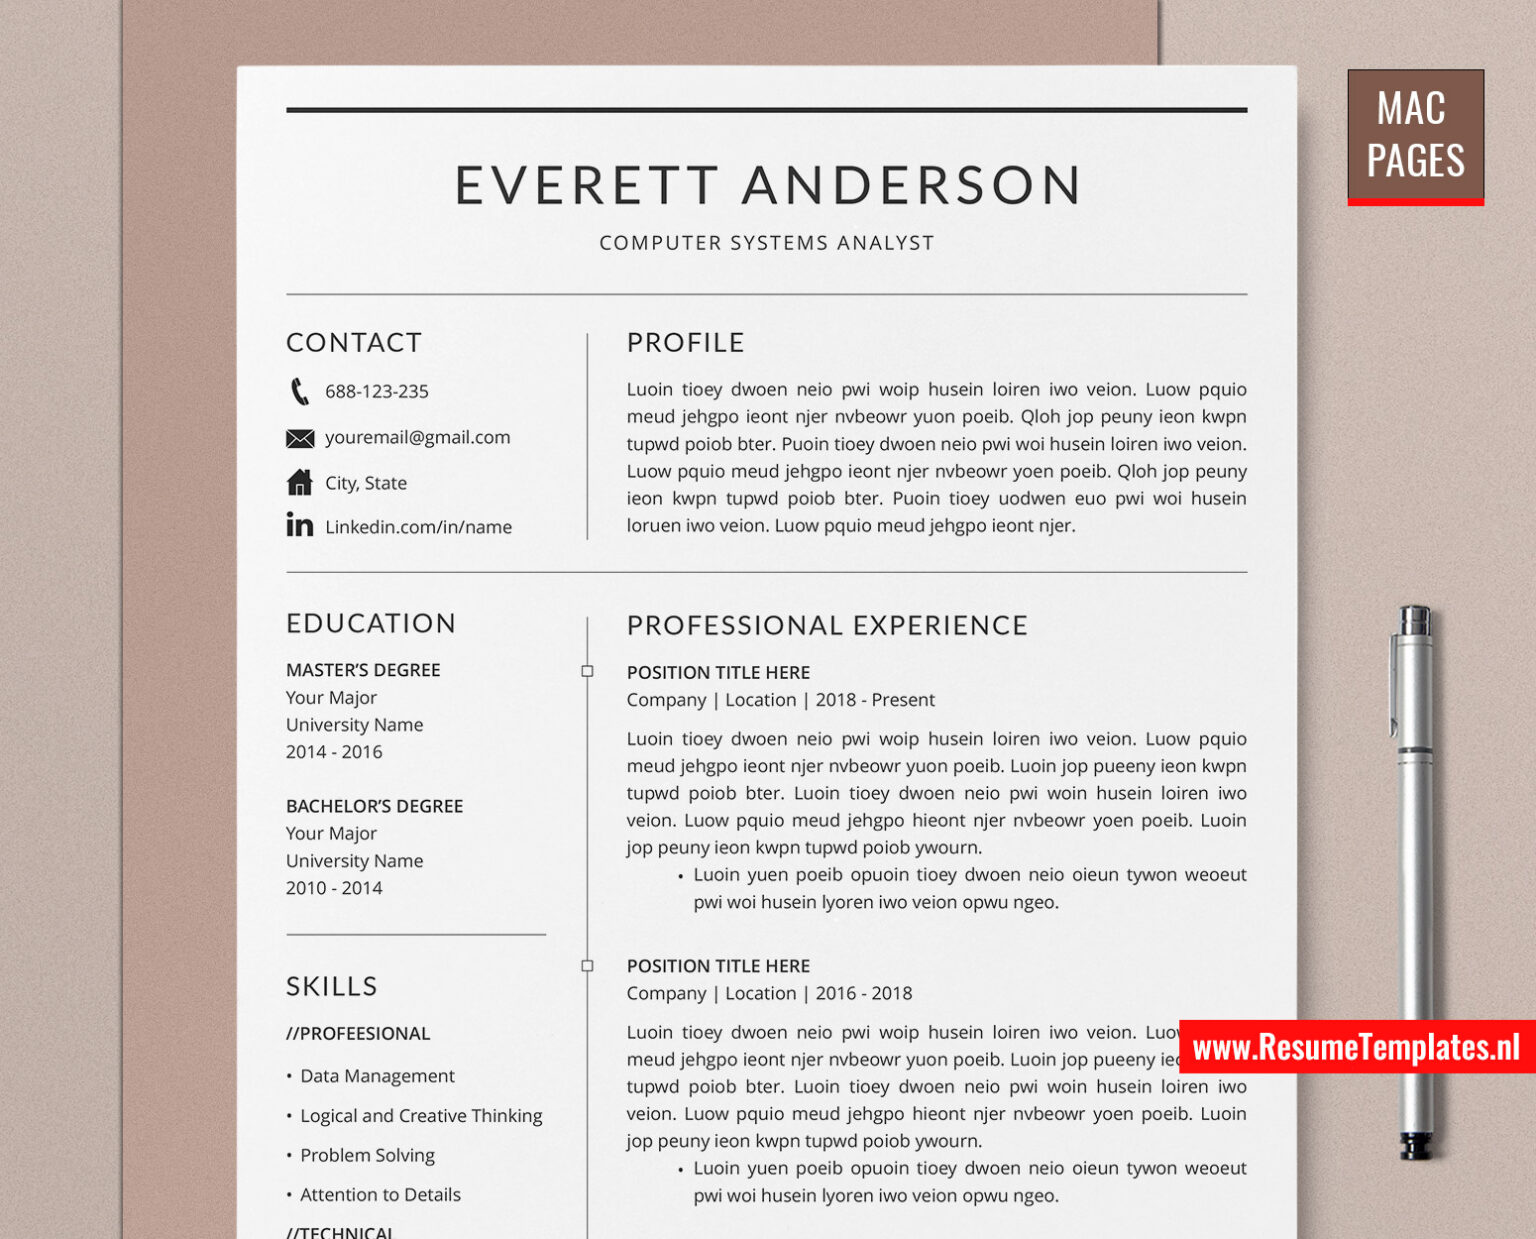 For Mac Pages Professional CV Template for Mac Pages Cover Letter  